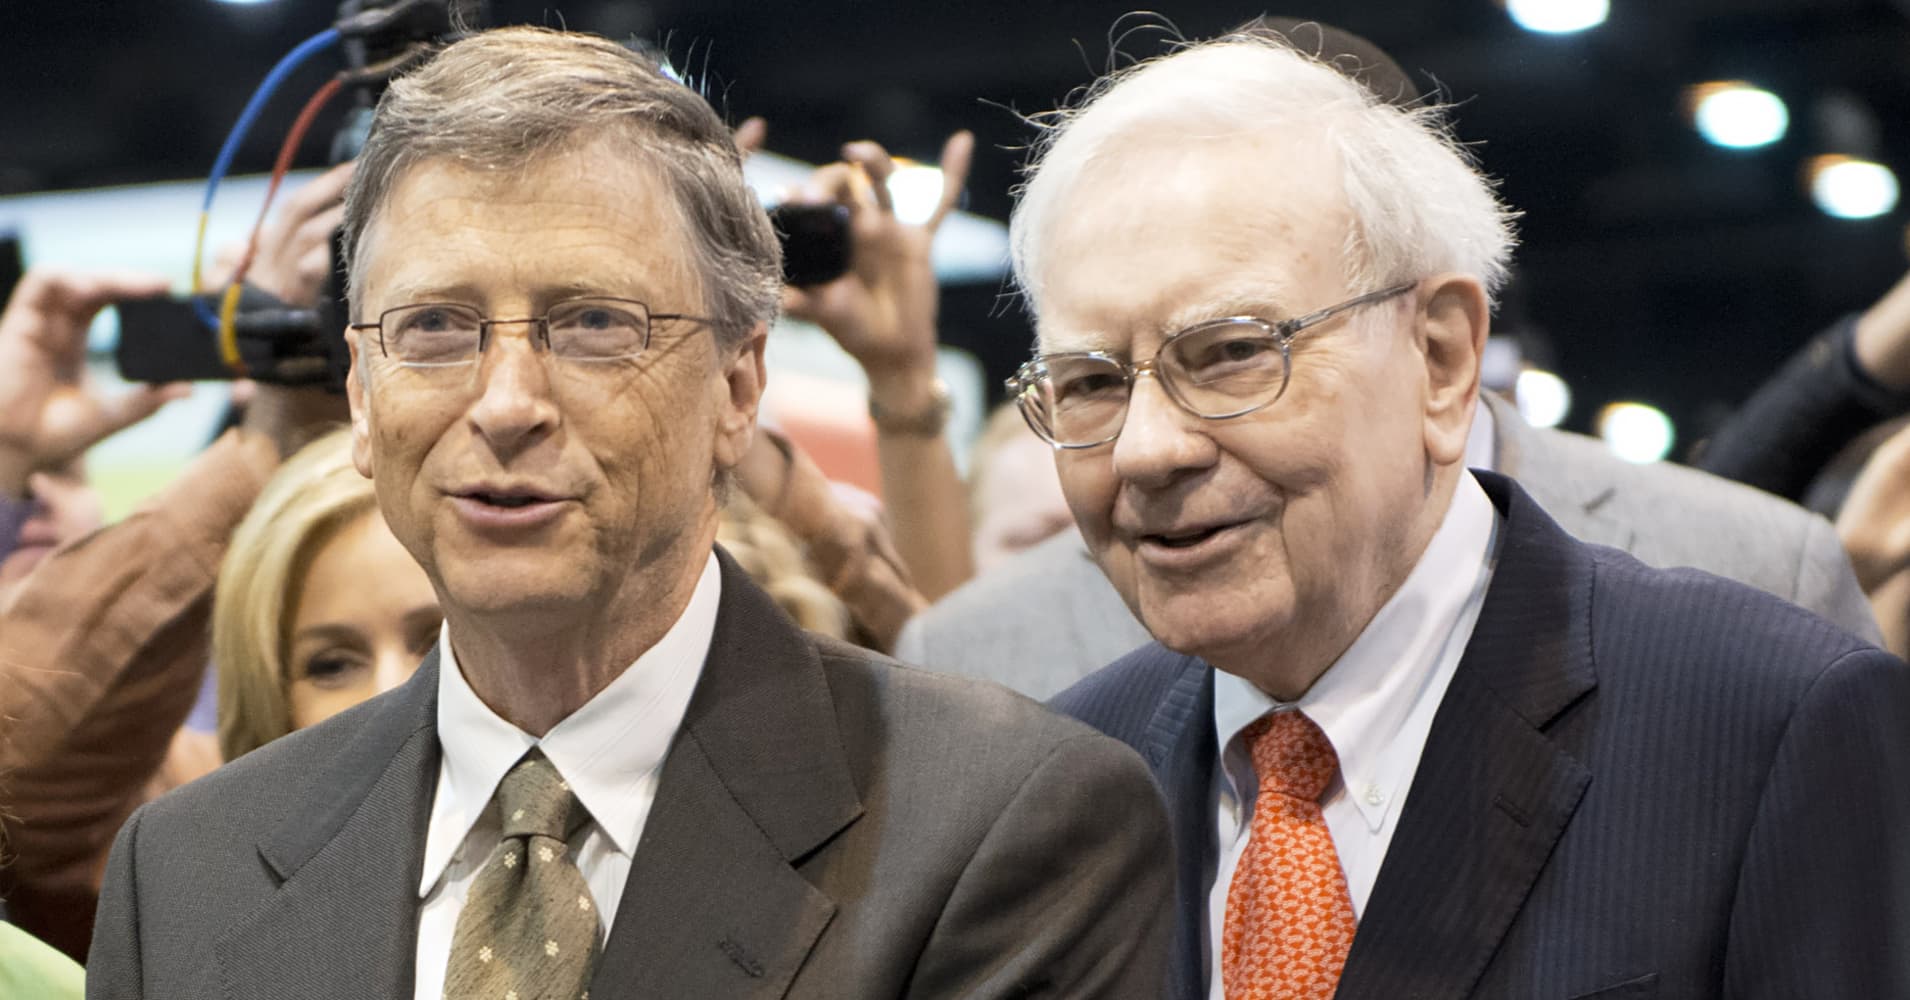 Warren Buffett, Bill Gates, are investing in clean energy—commentary